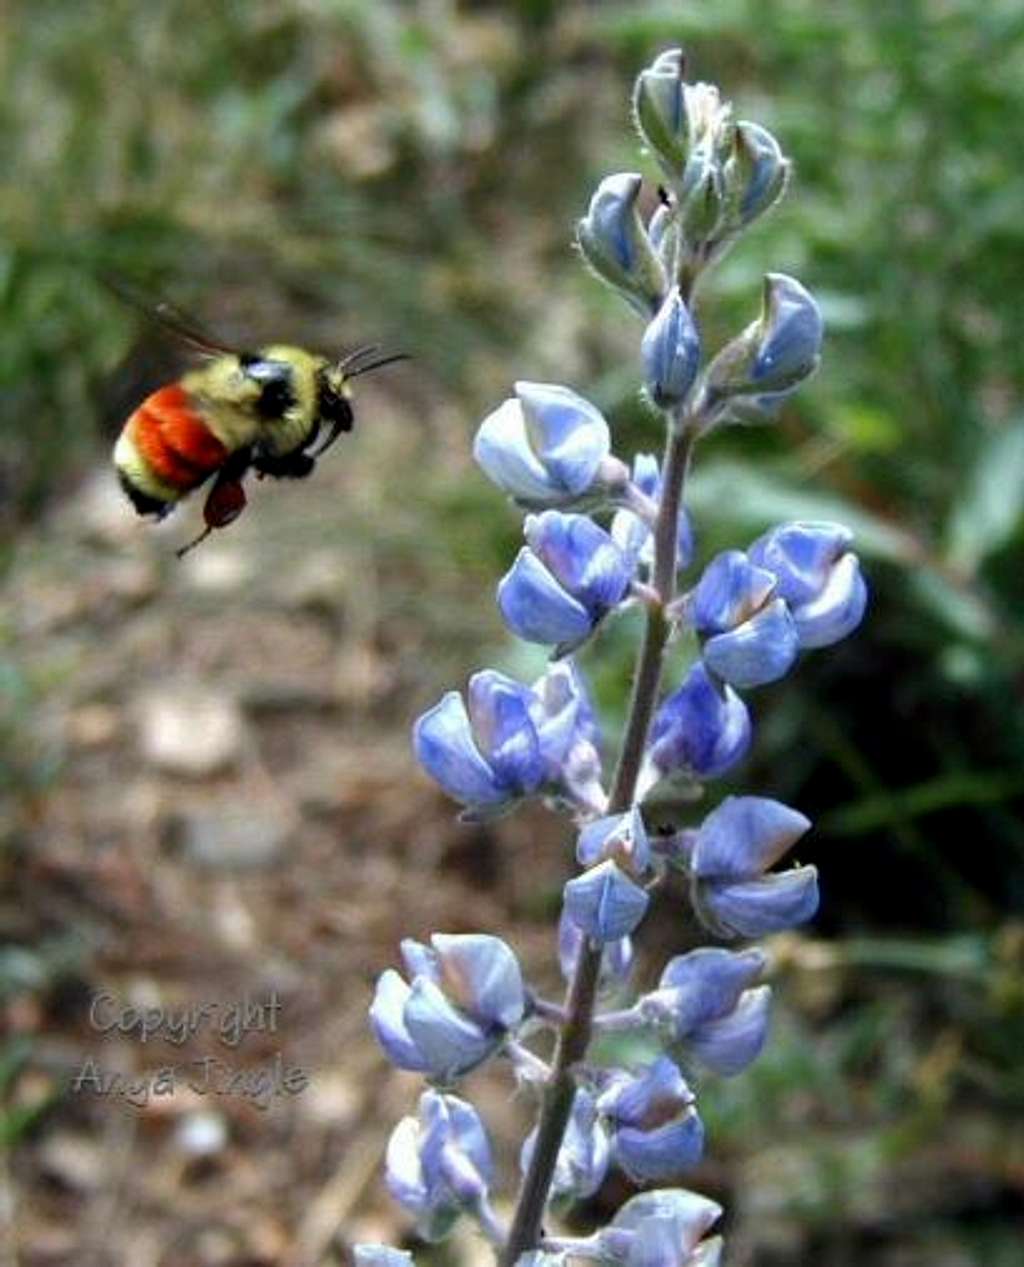 Bee on route to Lupine flower